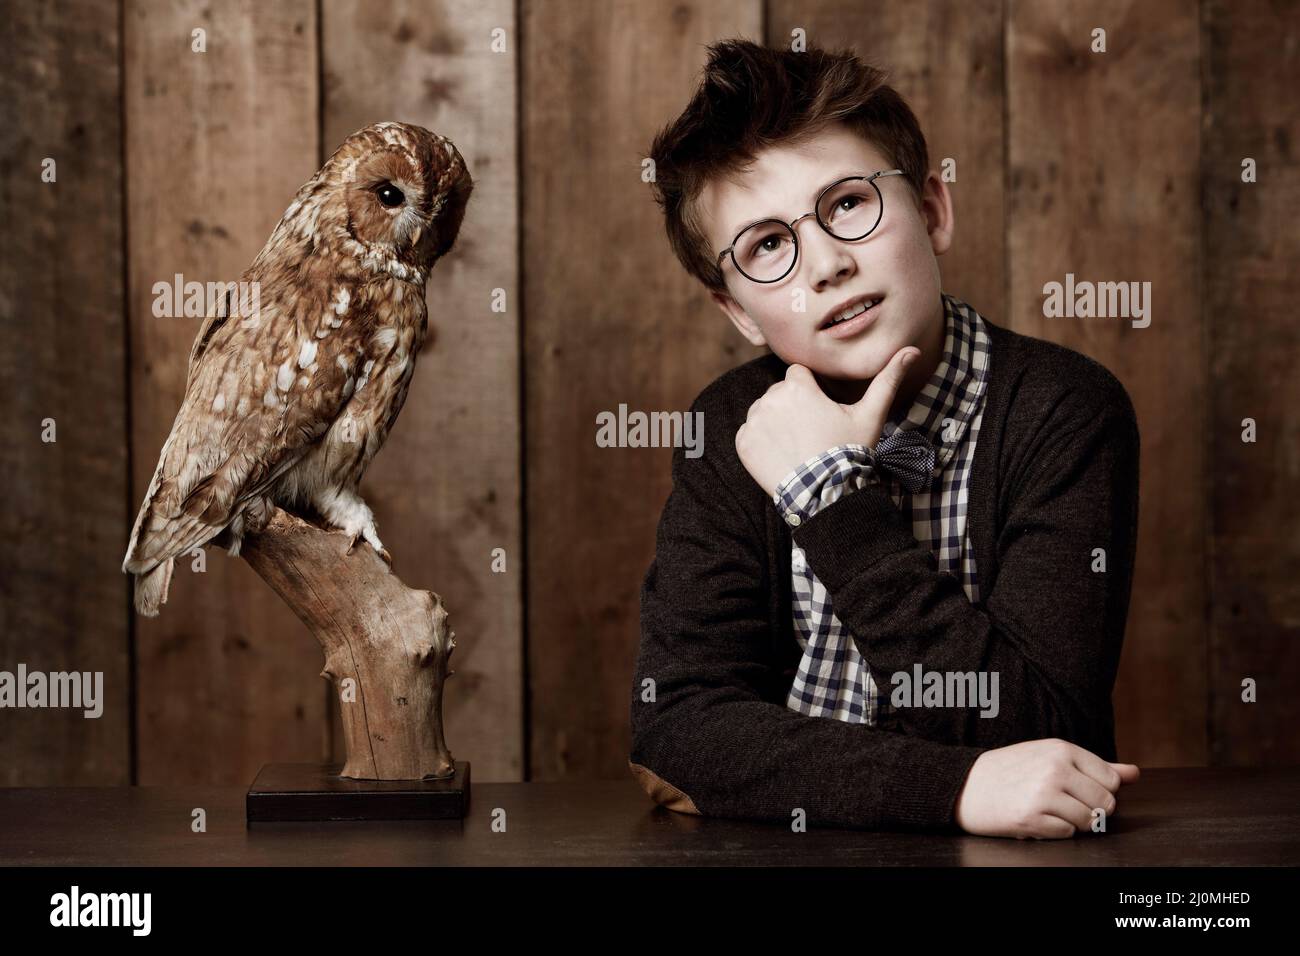 Thinking things over with wisedom. Young boy in retro clothing wearing spectacles with a thoughtful expression alongside an owl. Stock Photo